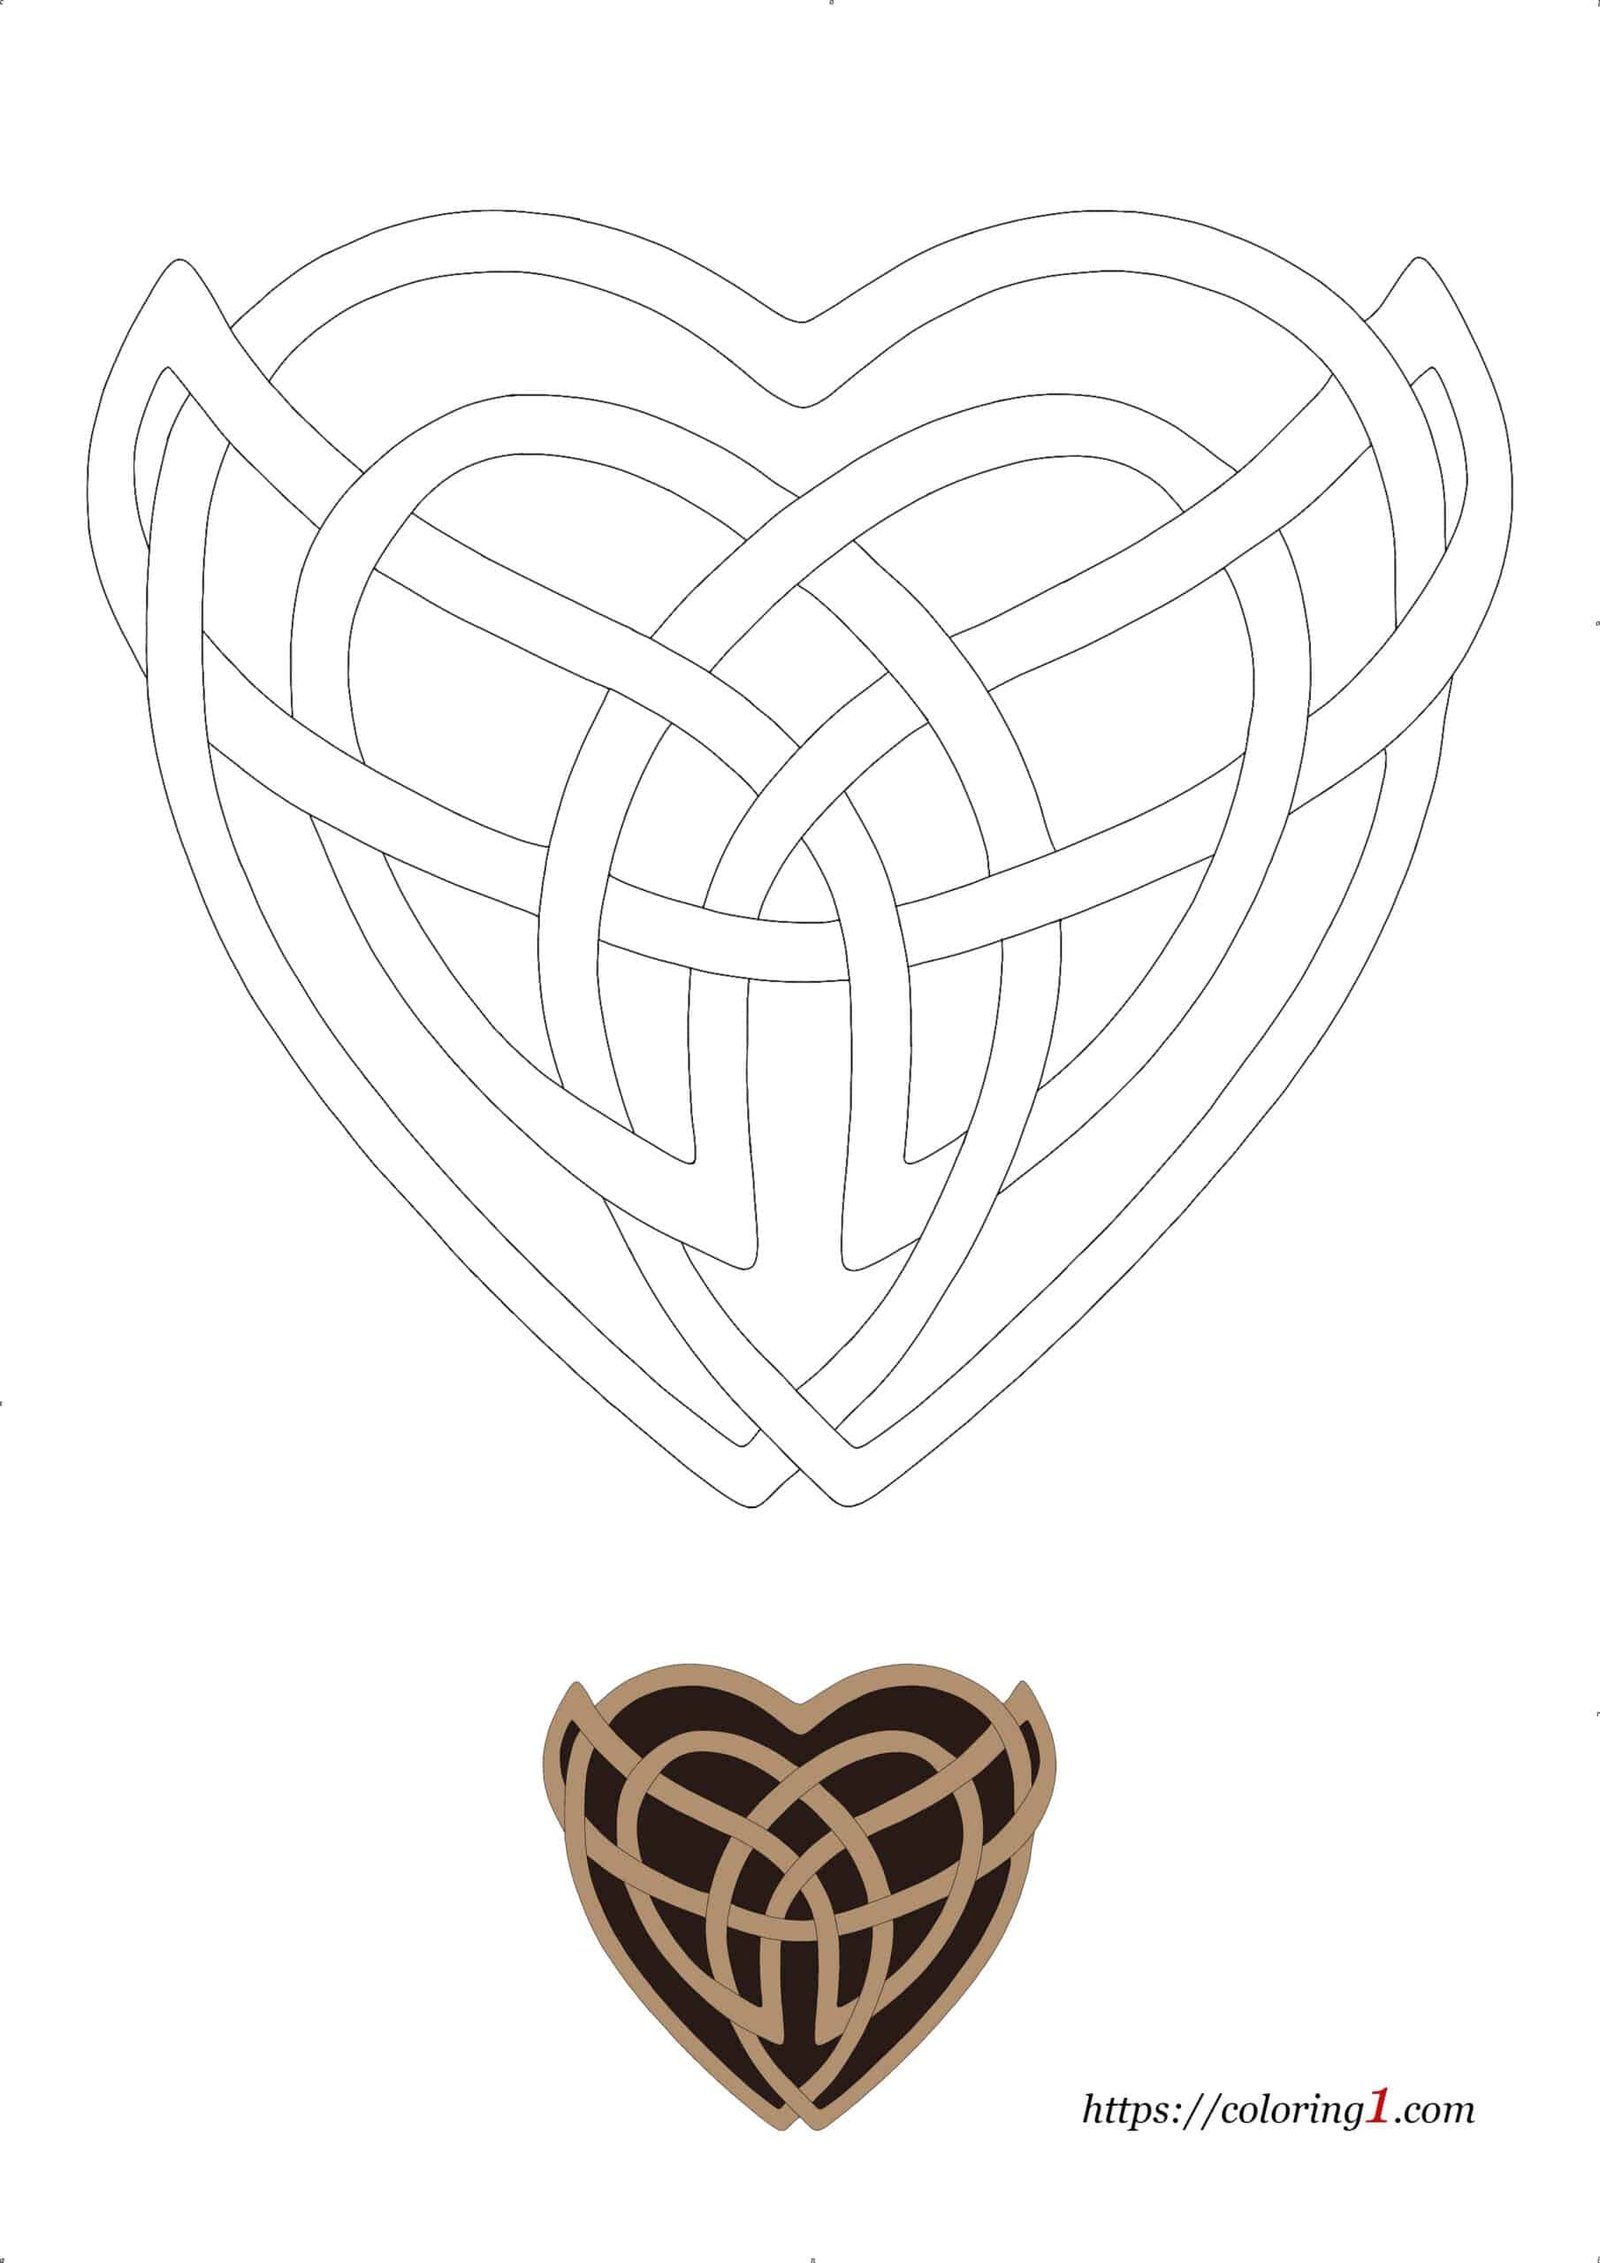 Celtic Heart coloring book page for adults and kids to print